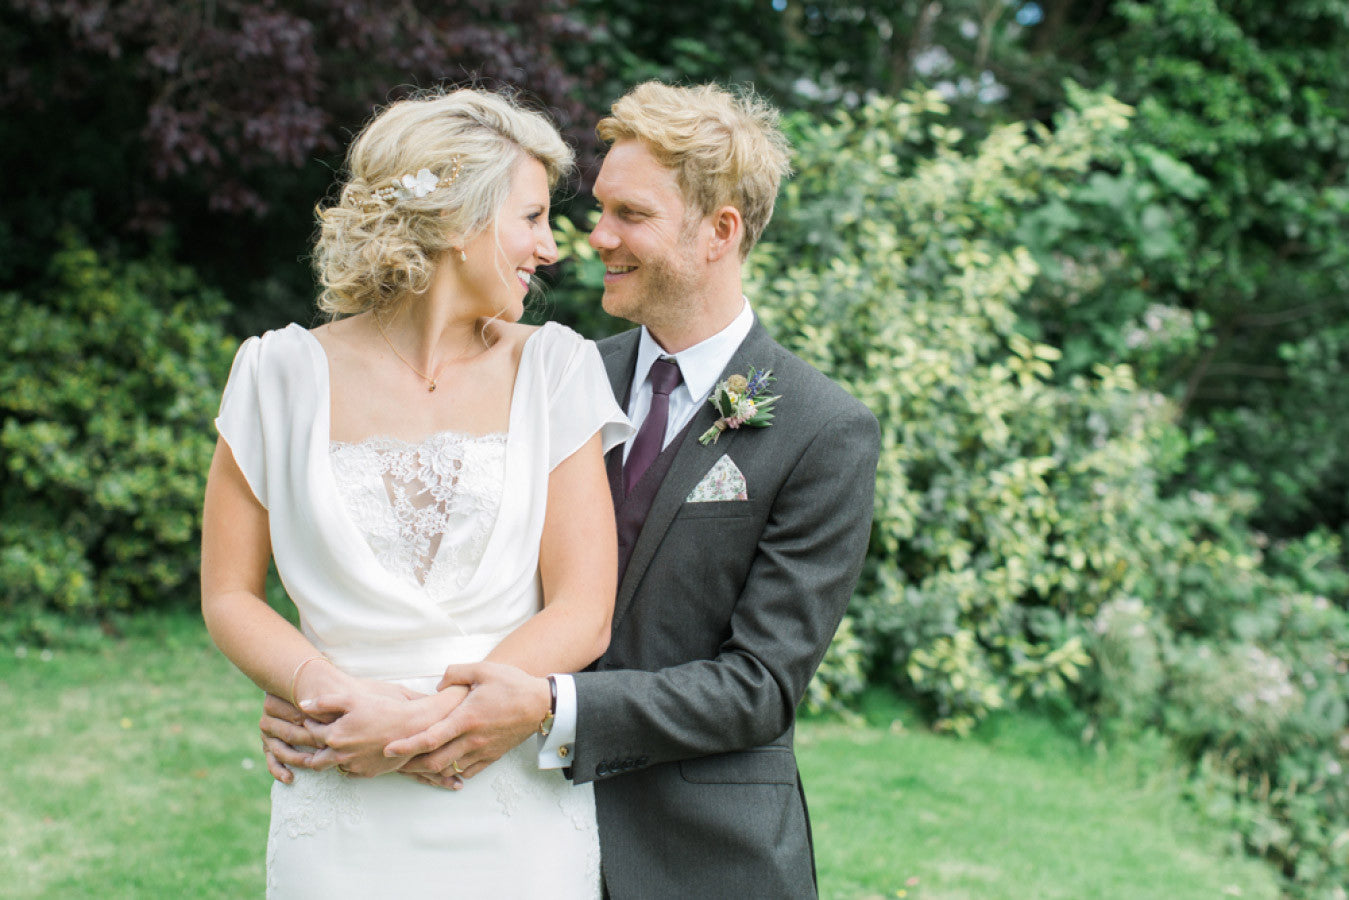 Real bride Sarah featured on Style Me Pretty wearing our Helvia hair comb